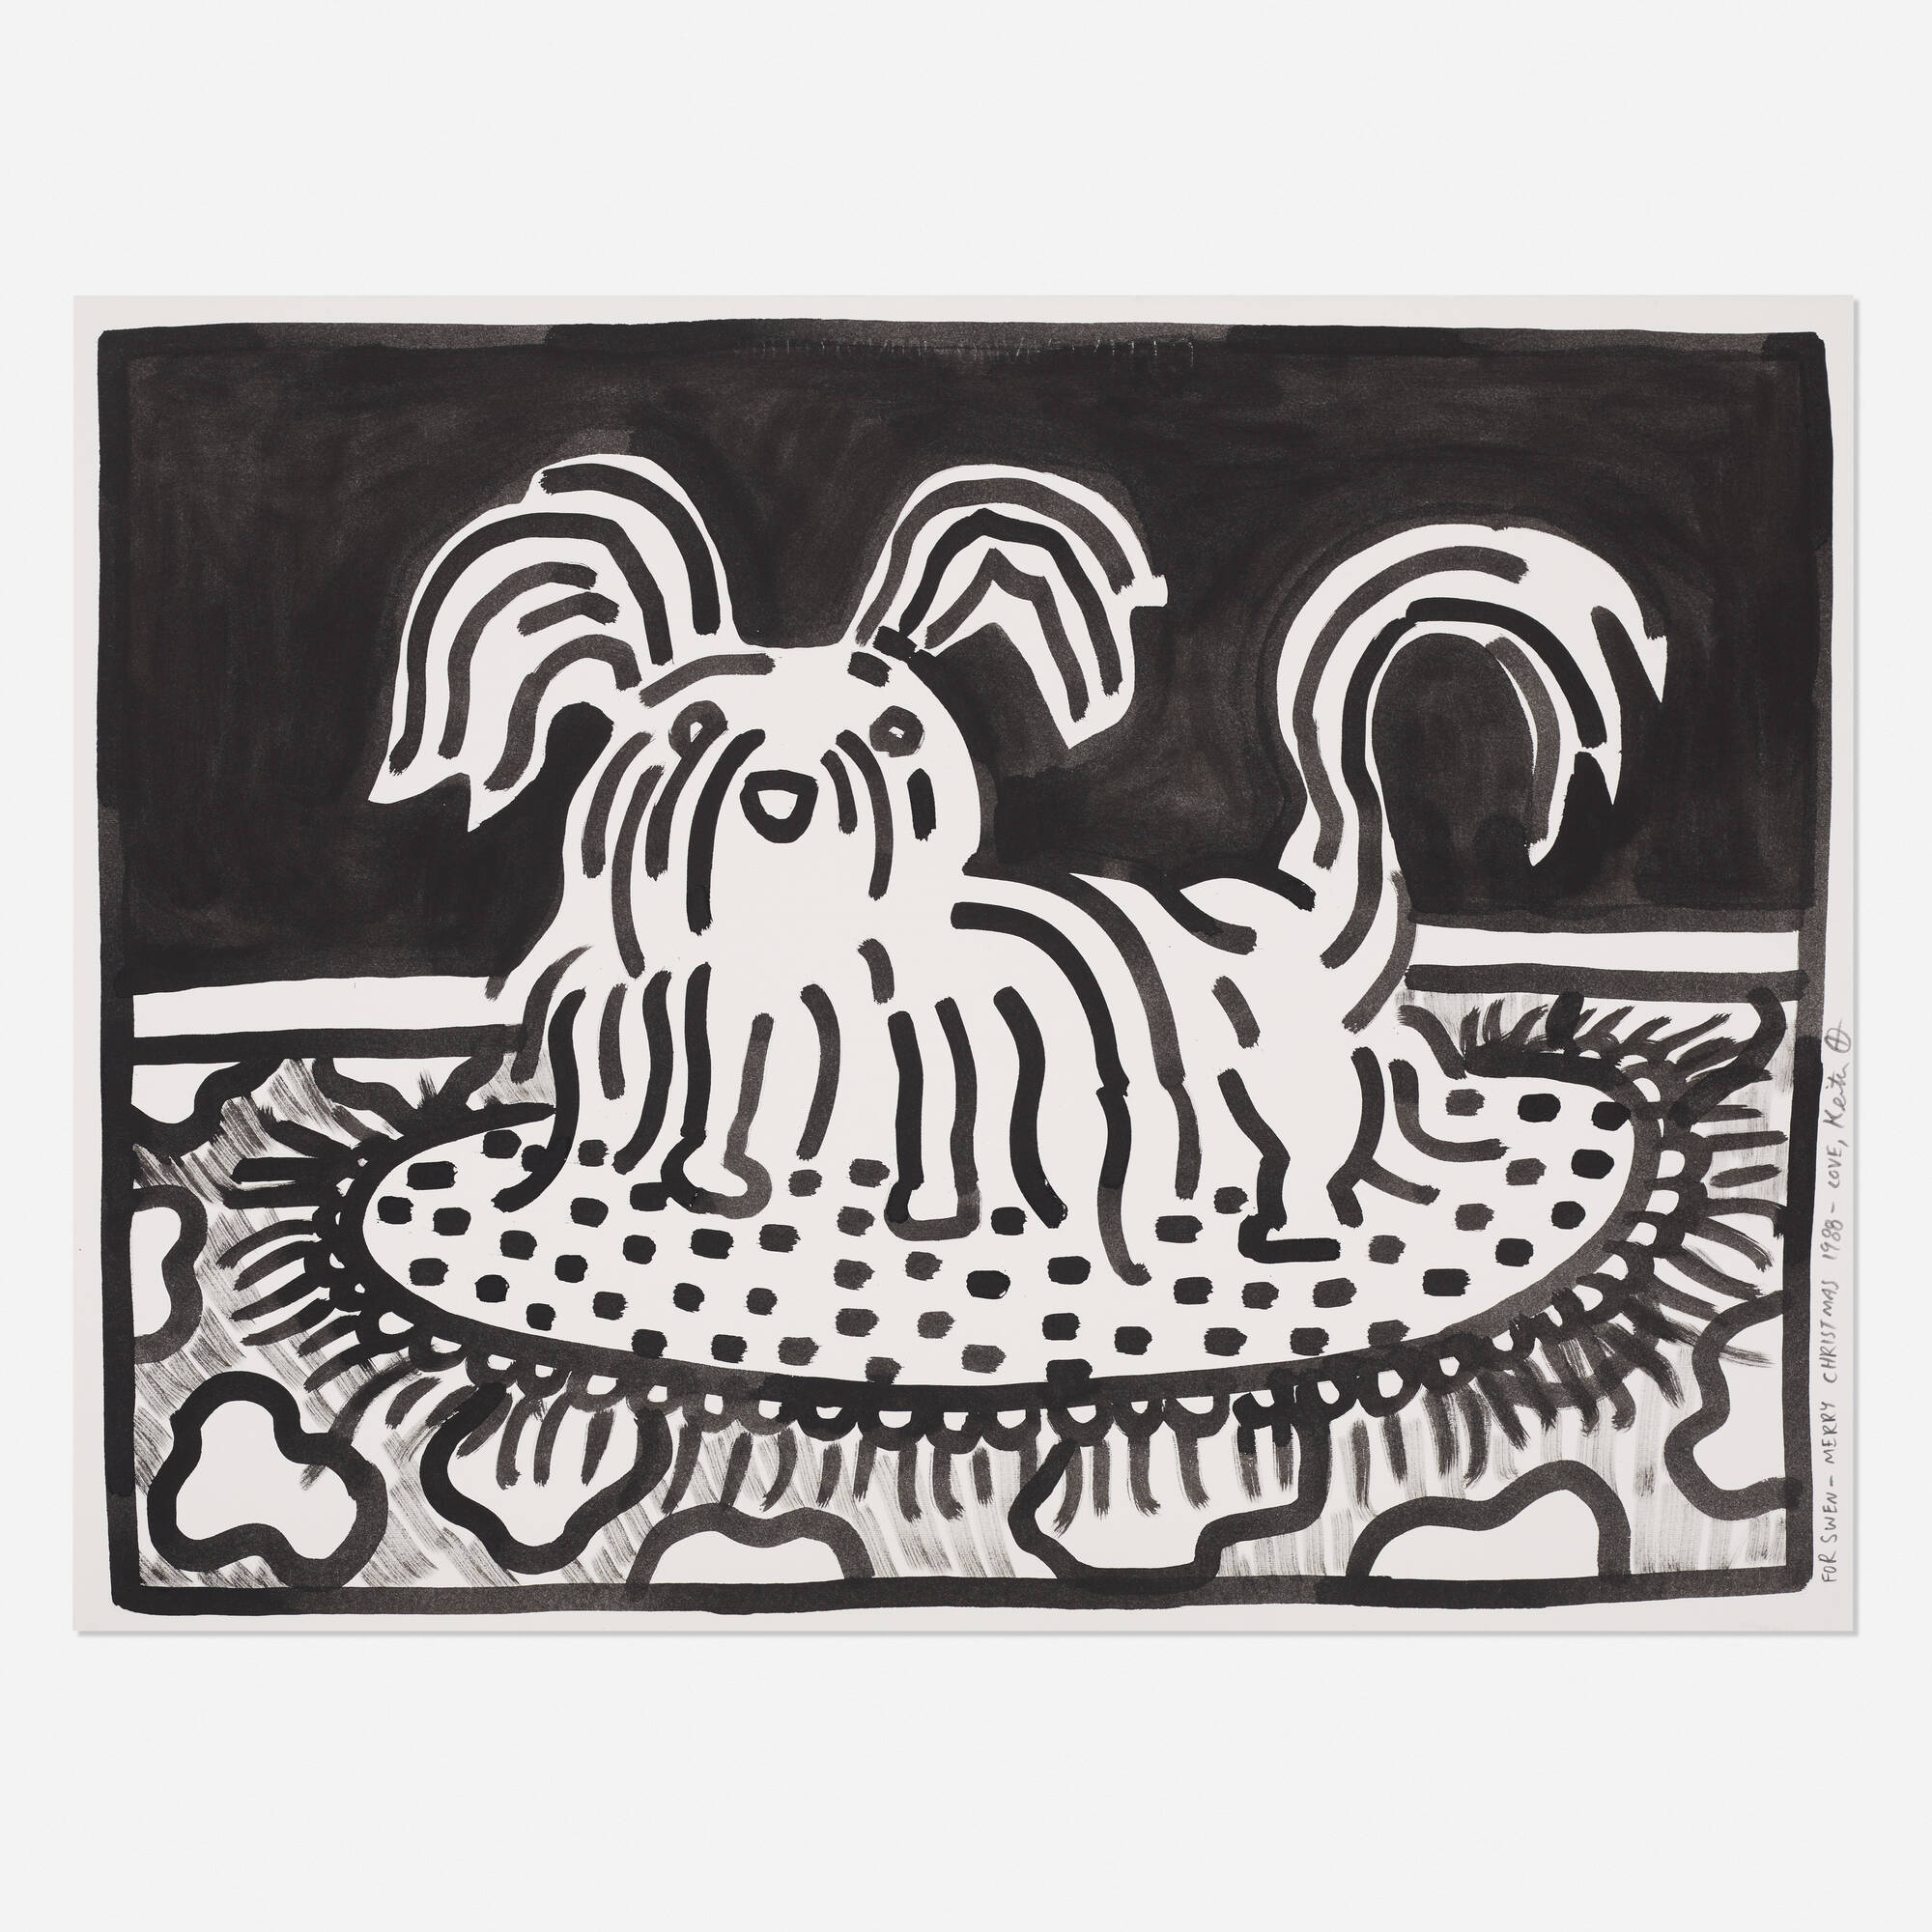 103: KEITH HARING, Untitled < 20th Century Art, 10 October 2019 